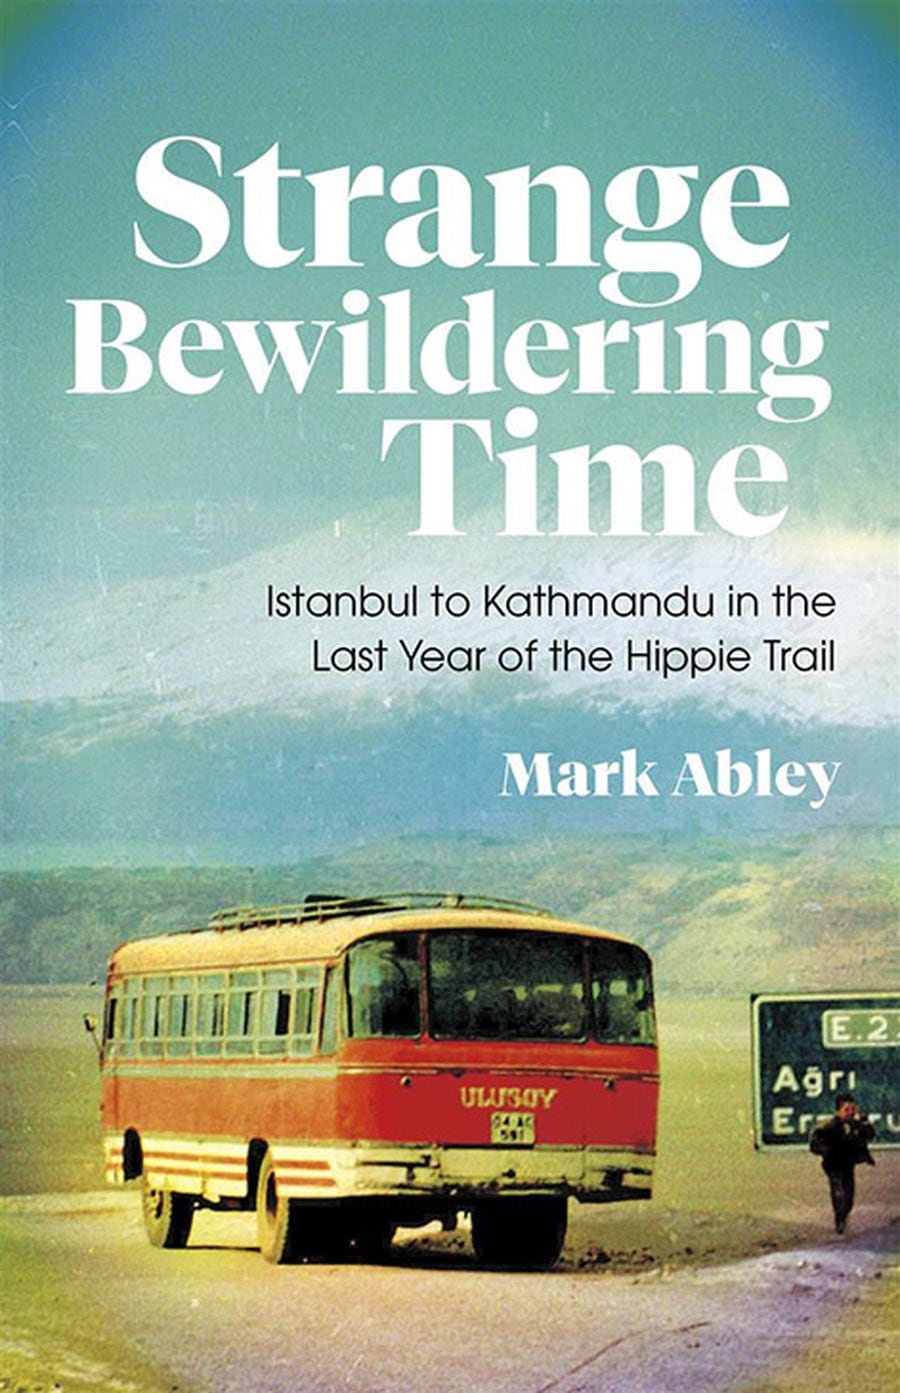 Strange Bewildering Time: Istanbul to Kathmandu in the Last Year of the Hippie Trail 